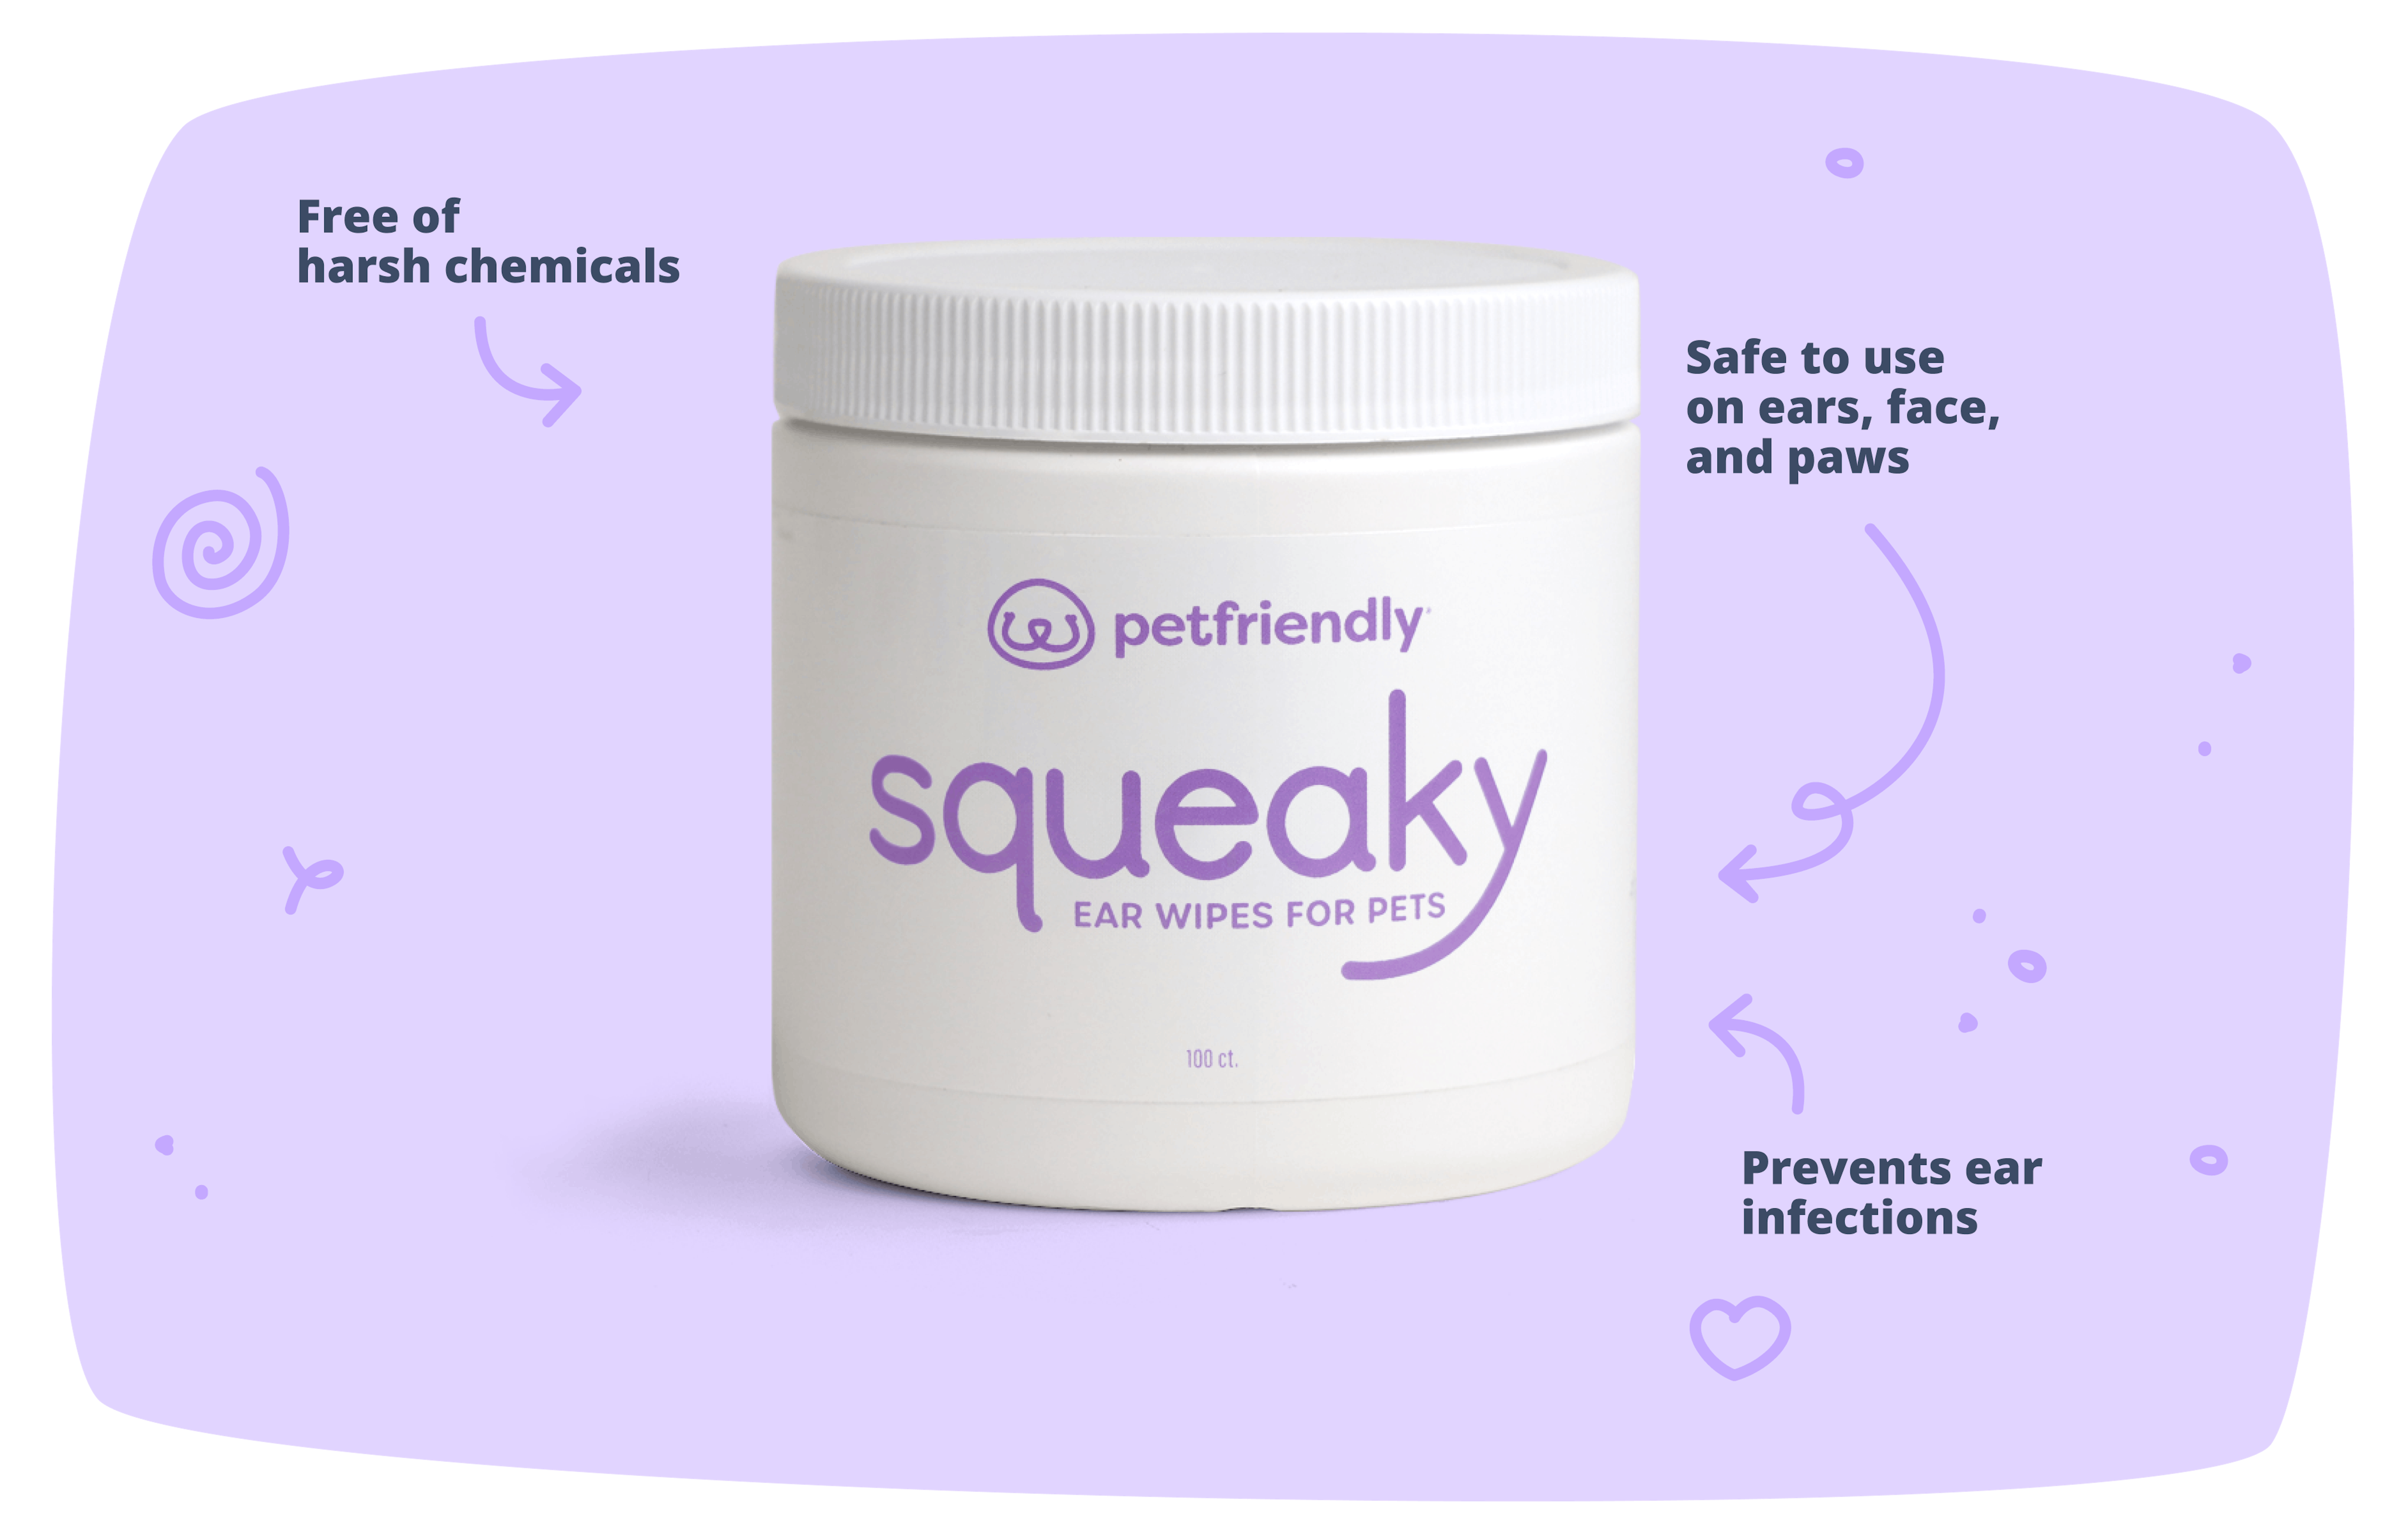 Squeaky Ear Wipes for Pets Benefits